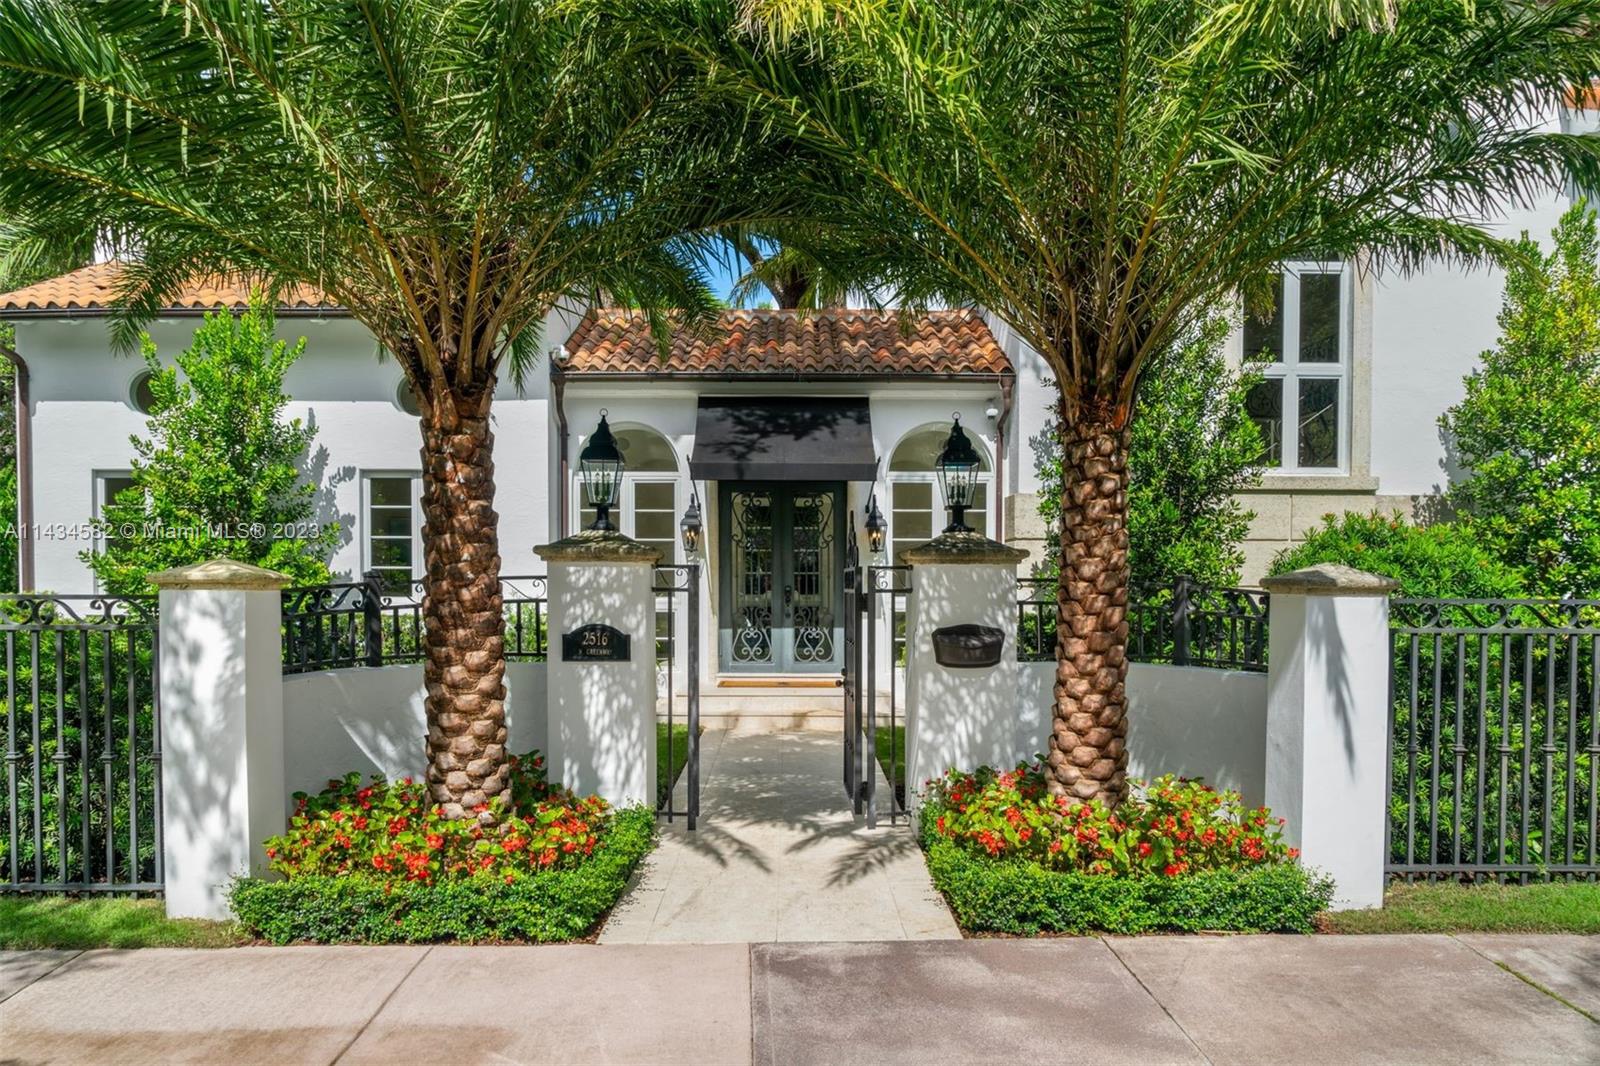 Beautiful 7,060 SF home on much sought-after North Greenway Drive in the heart of Coral Gables, with 6 bedrooms, 6.5 bathrooms, high-end design, and custom finishes. Interior features include 10' vaulted ceilings, arched doorways, and impact French doors and windows, providing ample natural light and outdoor views. A true chef’s kitchen features Wolf/SubZero appliances and a breakfast area with bay windows and views of the pool and garden. The sizable 17,355 SF gated lot offers several outdoor areas ideal for entertaining, with covered terraces, two gourmet summer kitchens, saltwater pool with jacuzzi, pergolas, and a charming courtyard with a magnificent oak tree. Other features include a Loxone smart home system, indoor/outdoor audio system, Visual Comfort lighting system, and more.